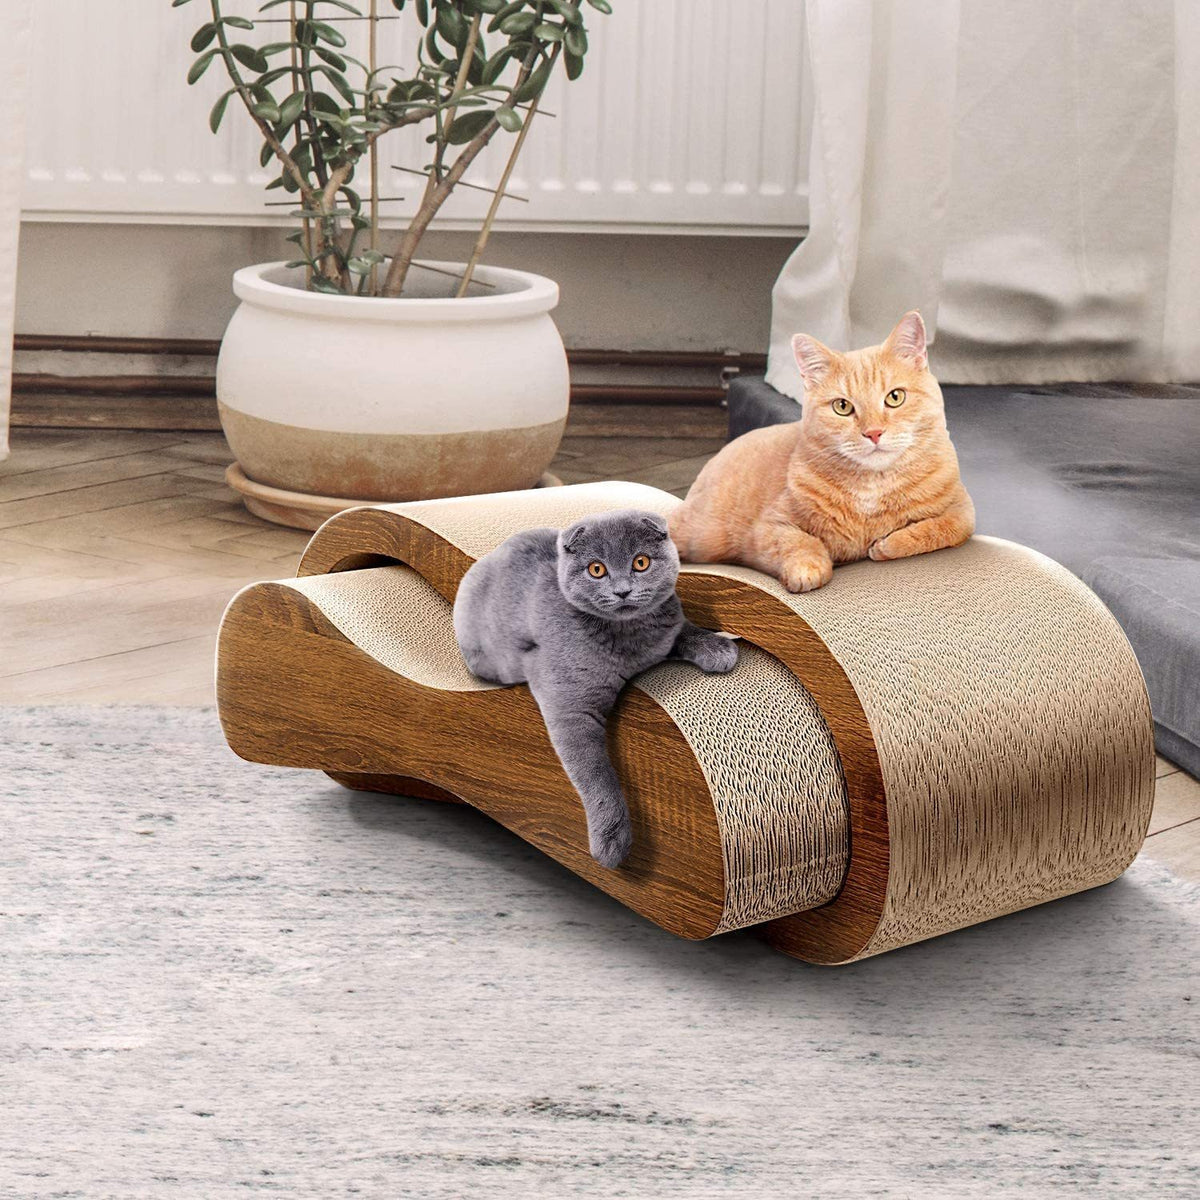 FluffyDream 2 in 1 Cat Scratcher Cardboard Lounge Bed, Cat Scratching Post, Durable Board Pads Prevents Furniture Damage,Large